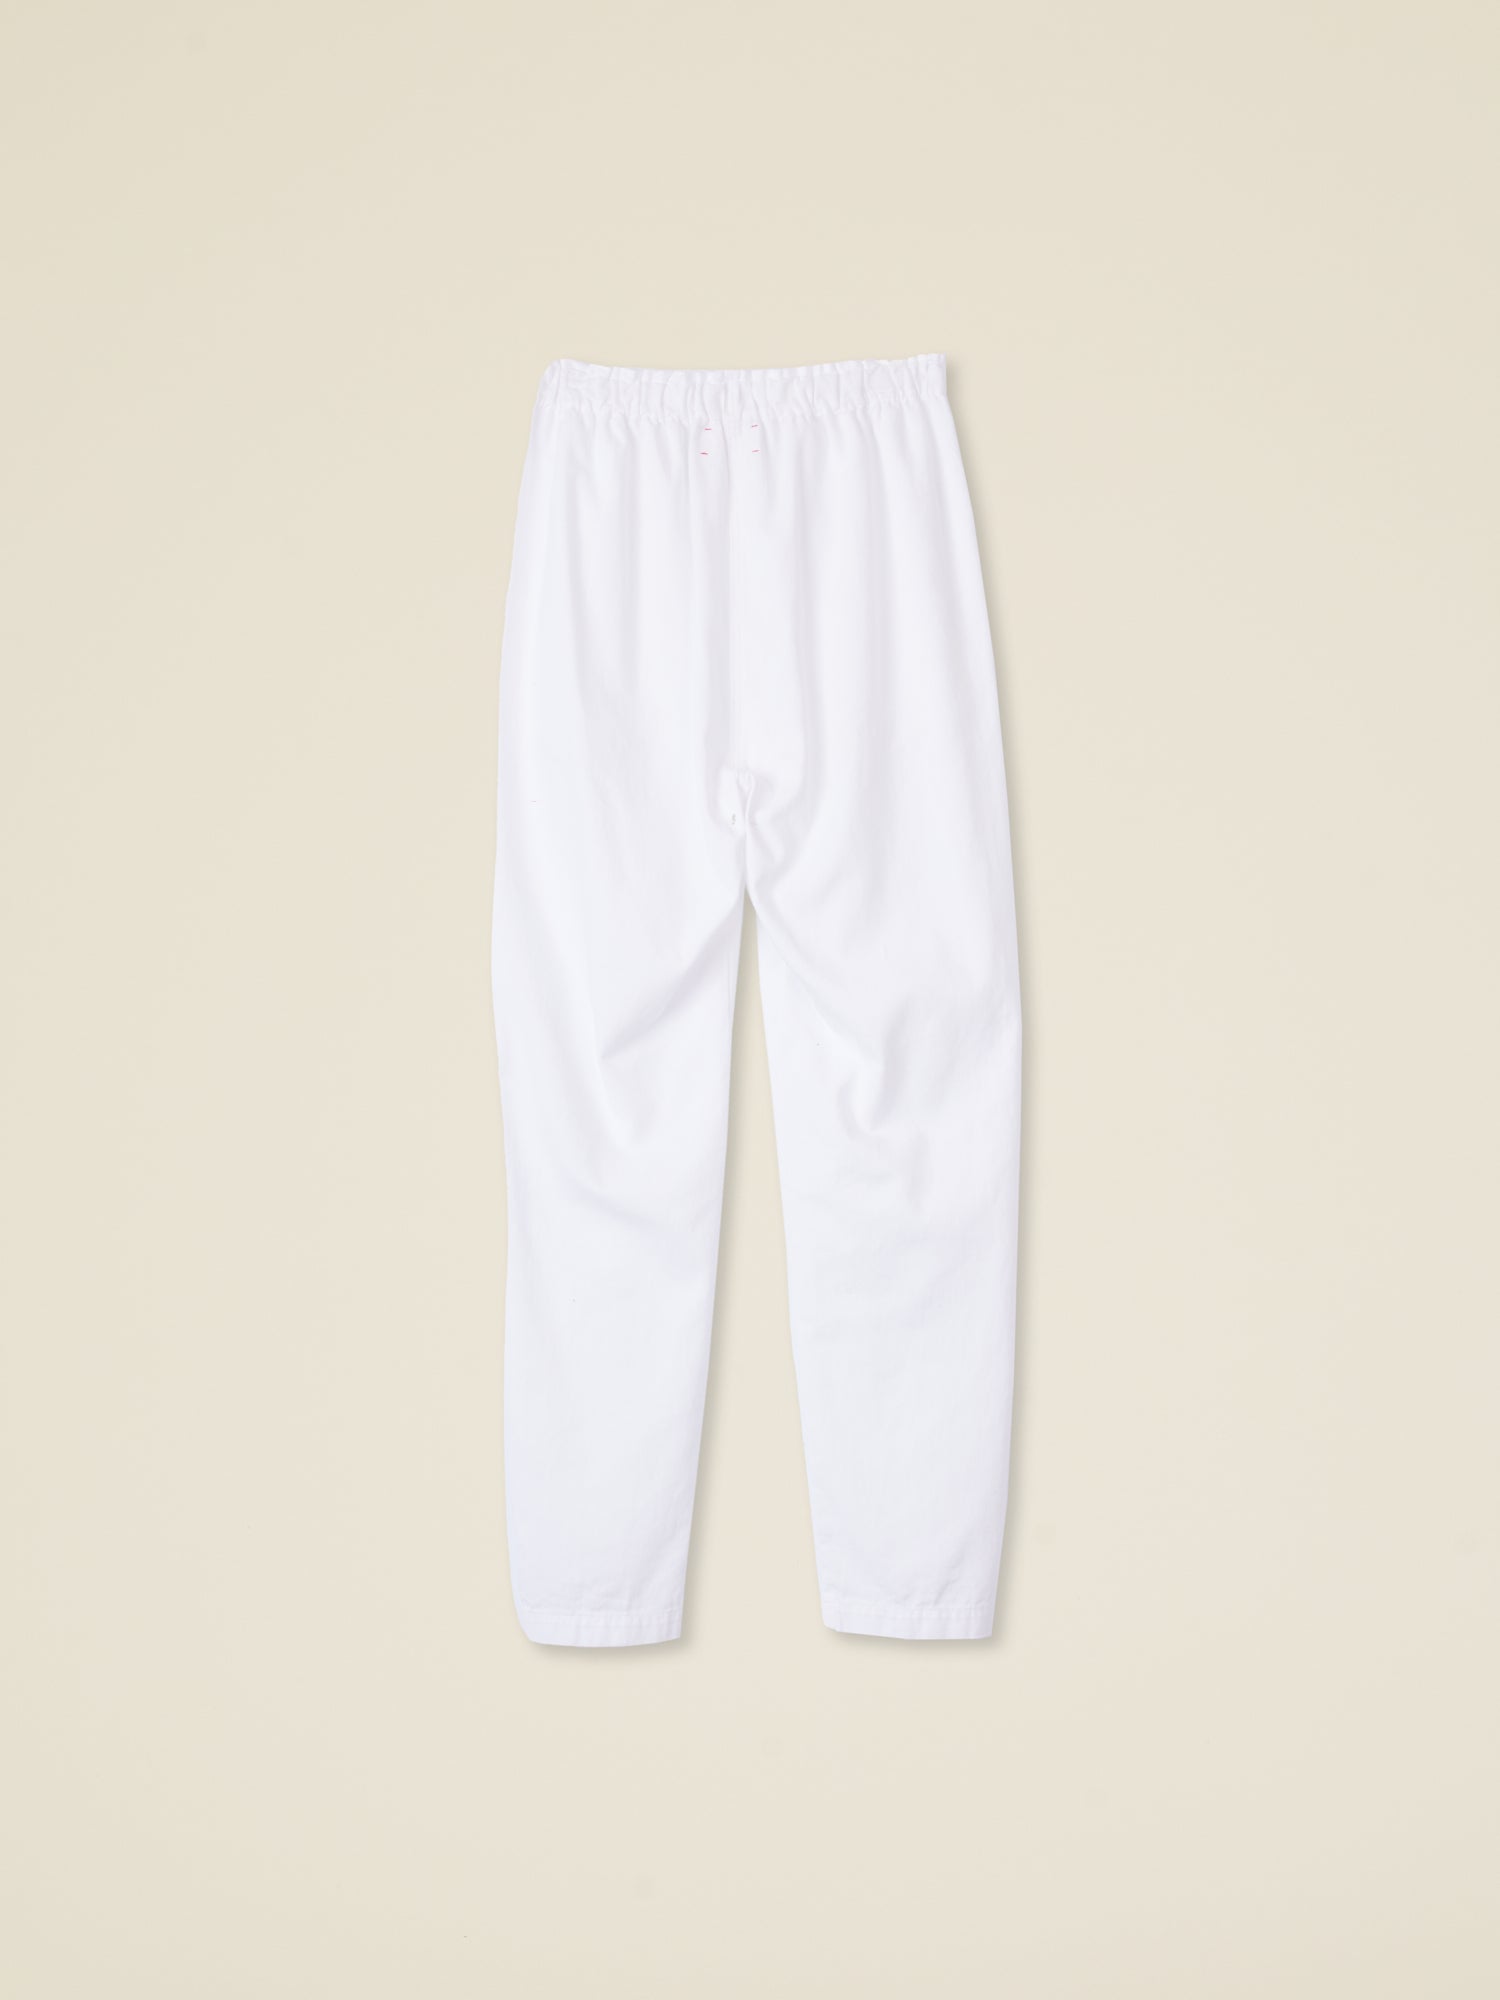 The Xirena Rex Pant in White available at The New Trend Australia